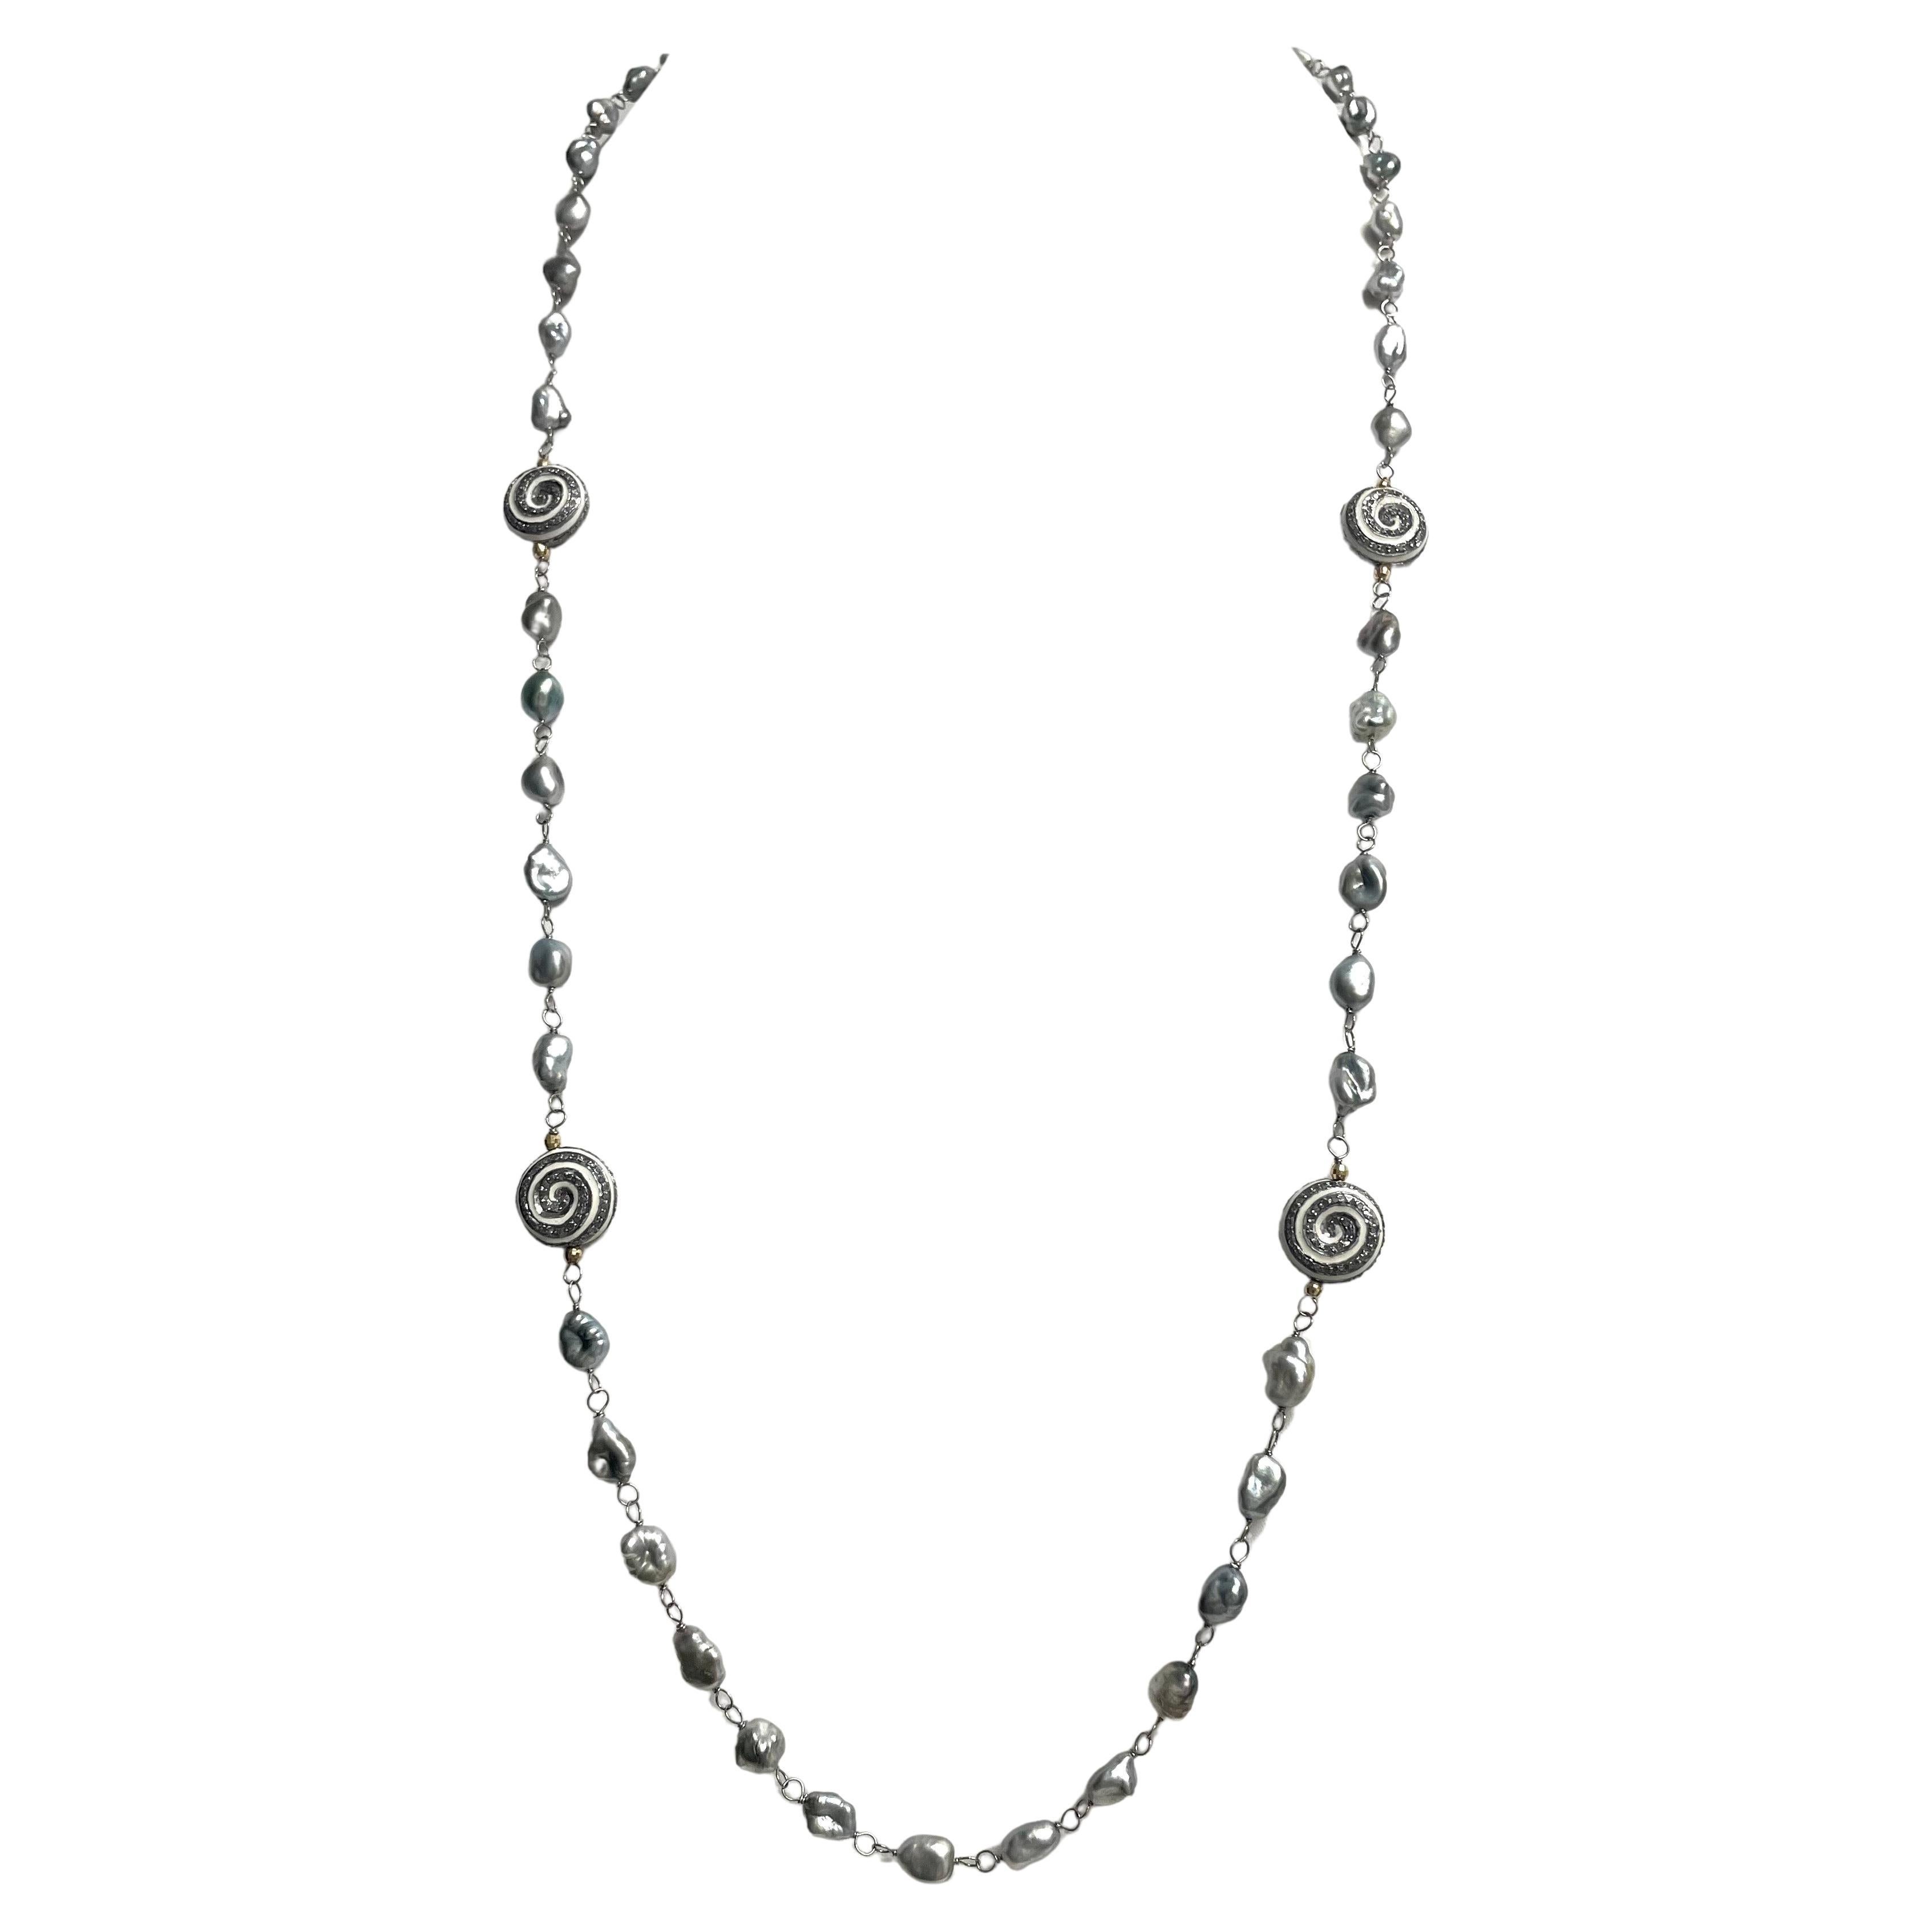 Tahitian Keshi Pearl Necklace with Enamel and Pave Diamond Pinwheel Accents